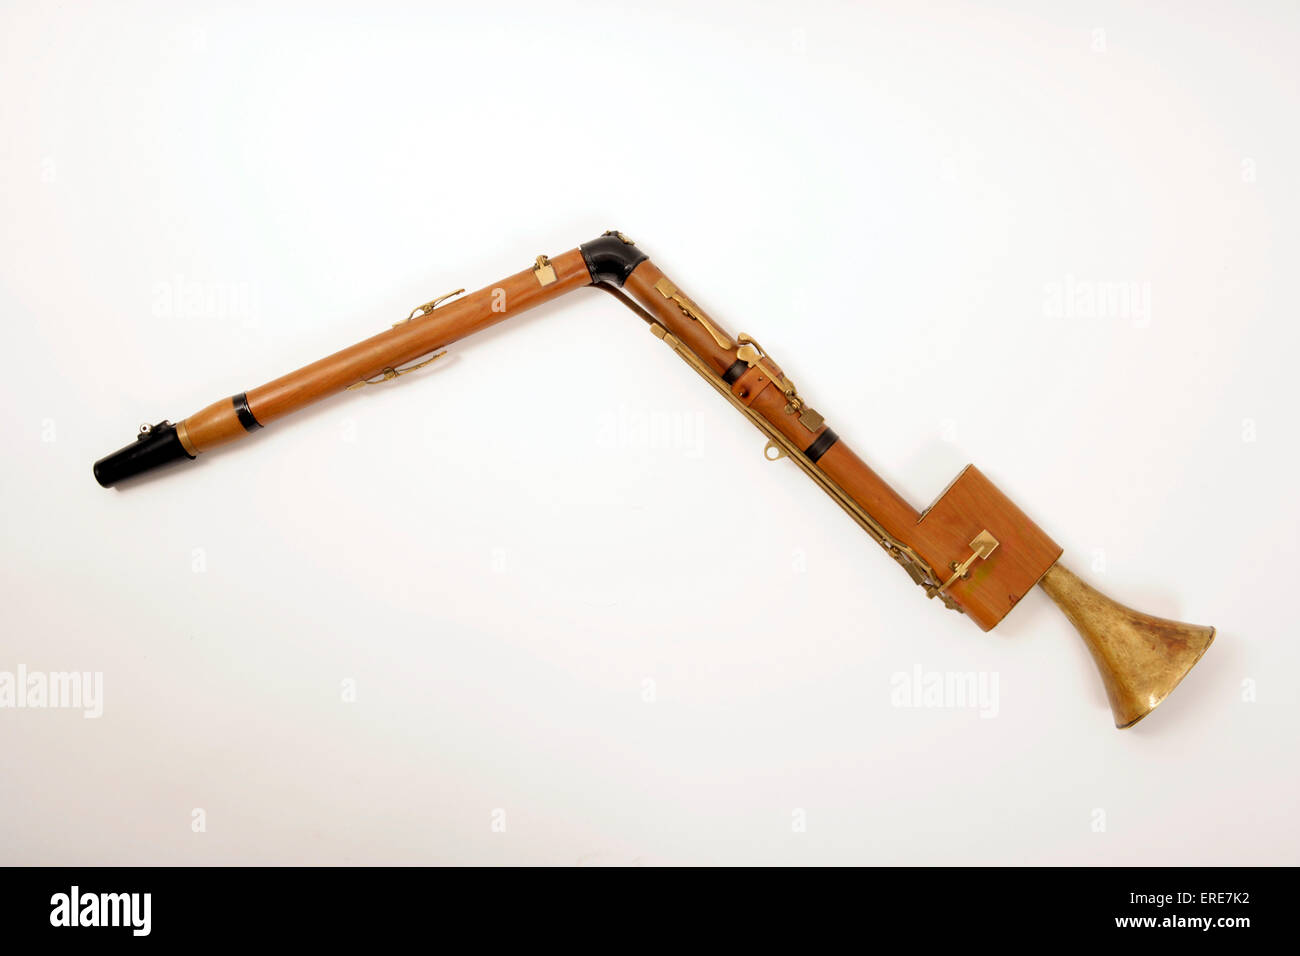 Basset horn, period instrument from the 1700s, Classical period. Stock Photo